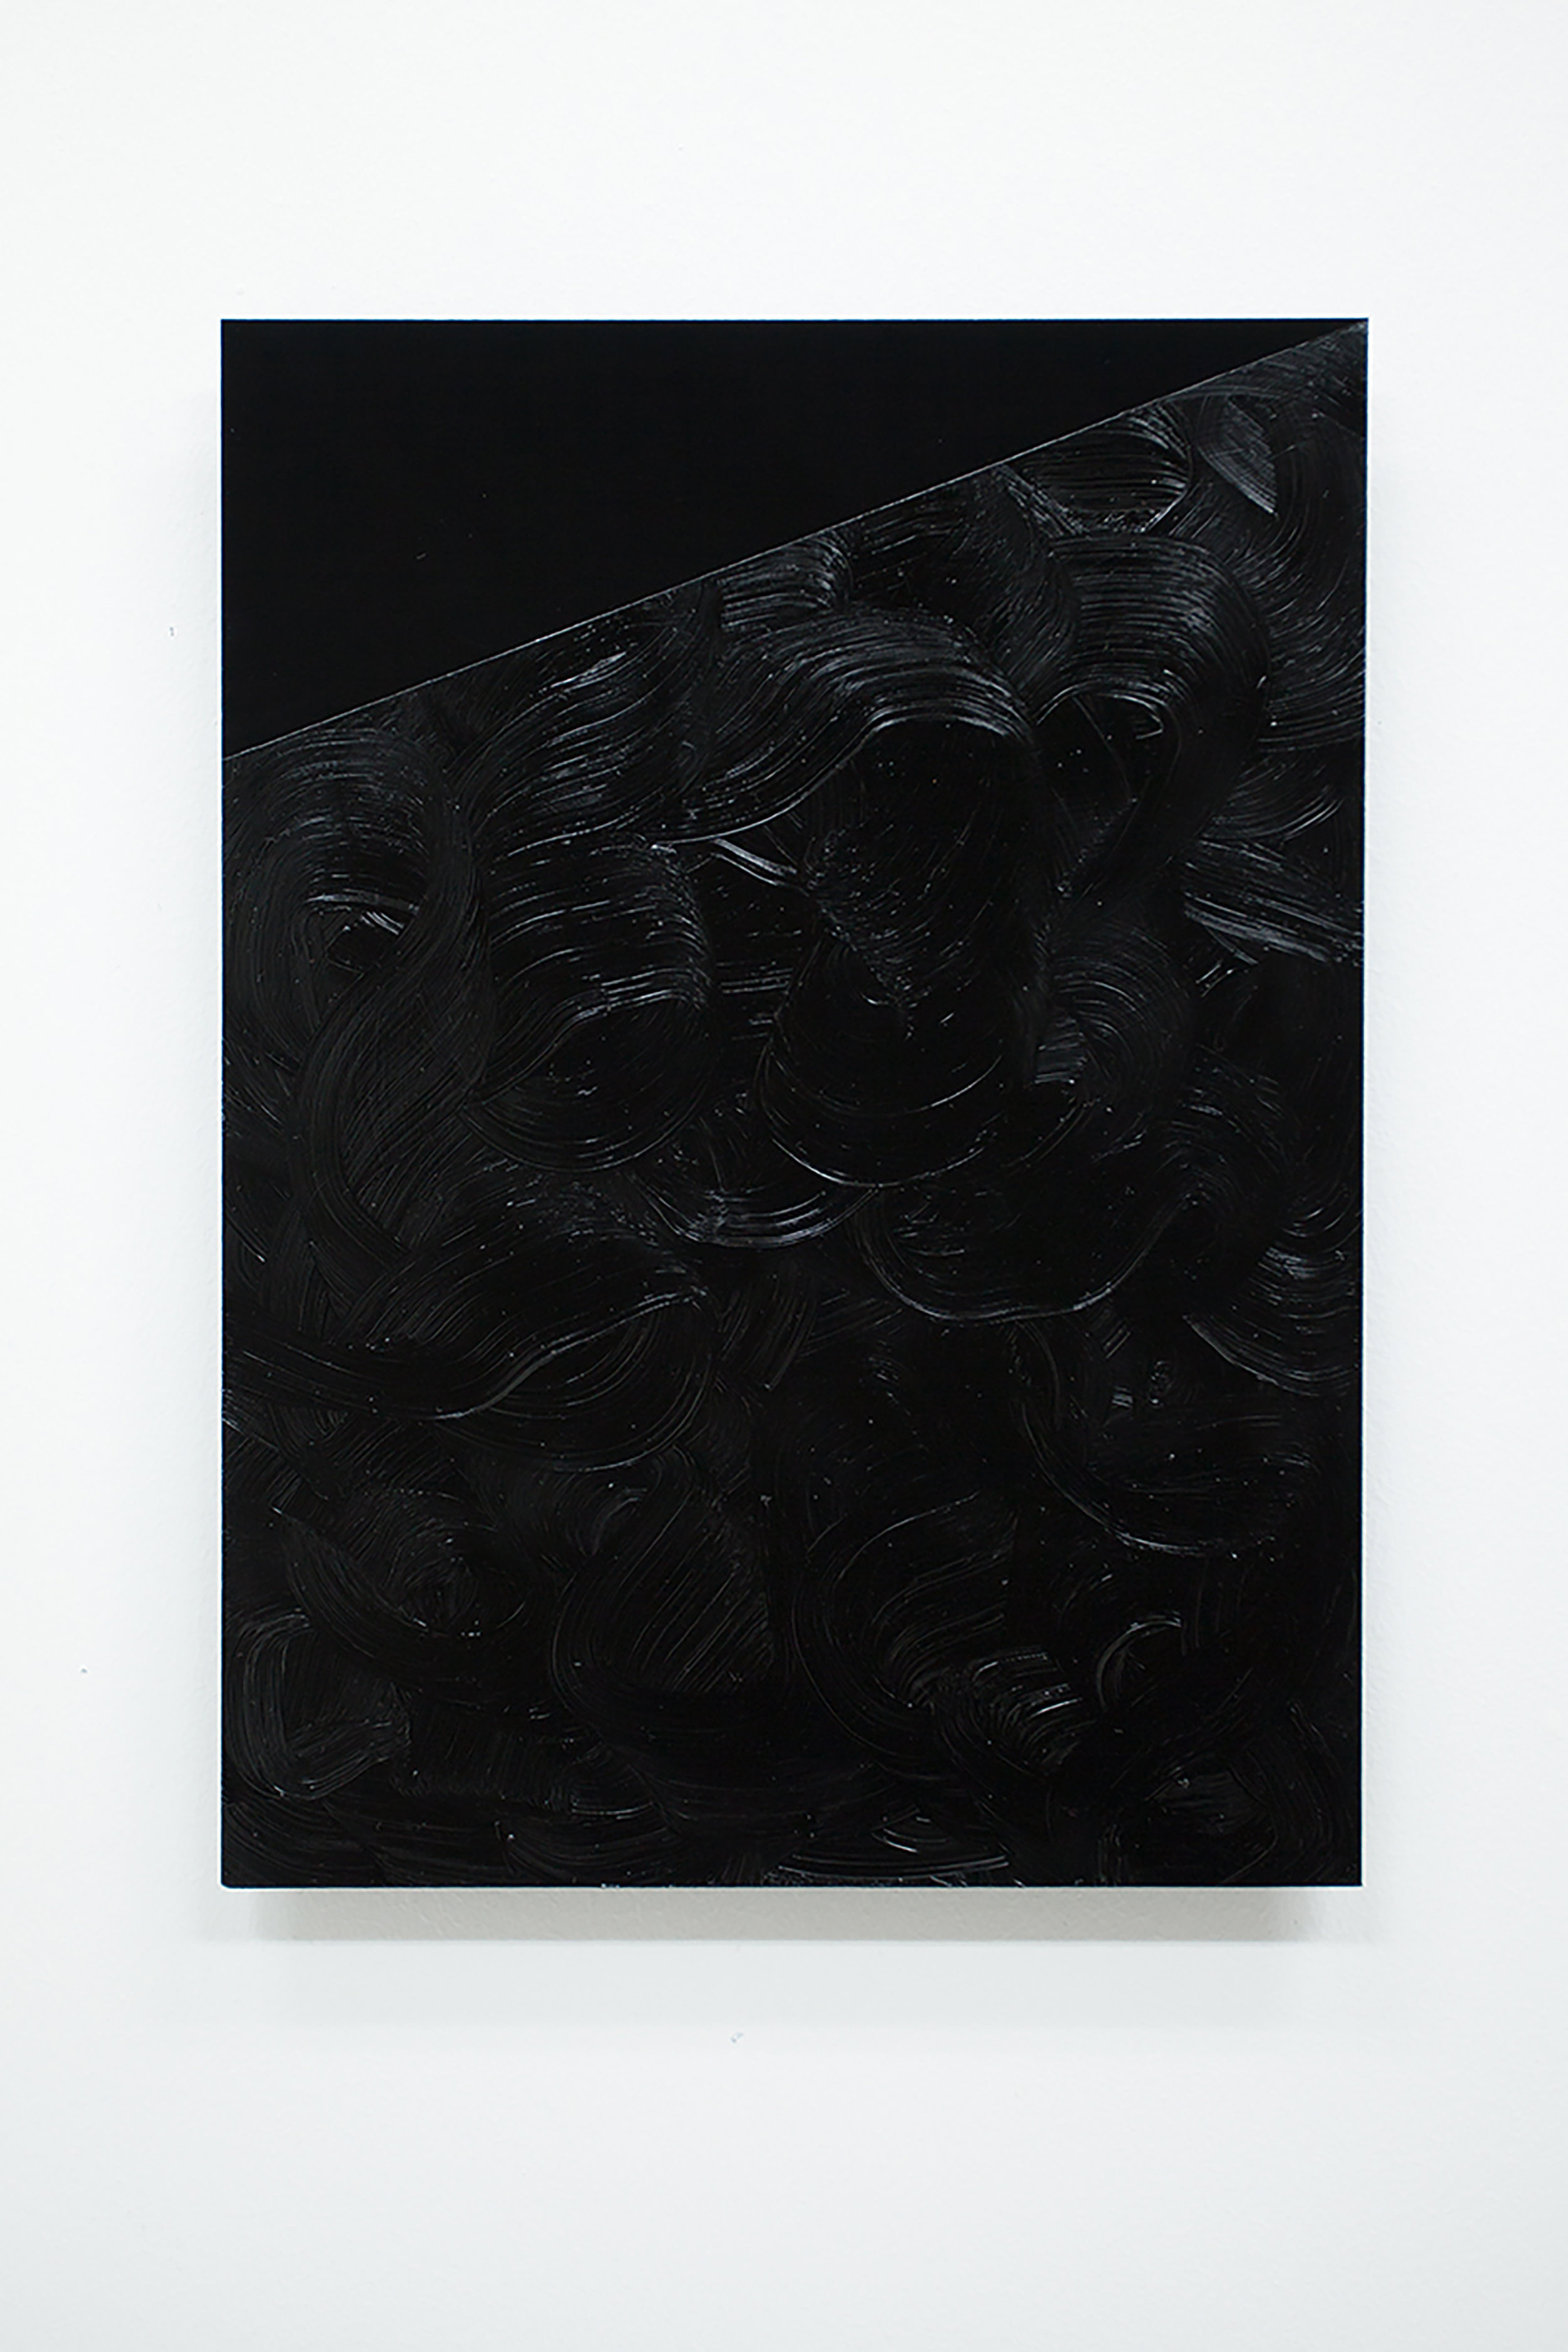  Anders Sletvold Moe. Black Letter Series, 2014. Oil and acrylic on plexi glass. 8.27 x 11.69      